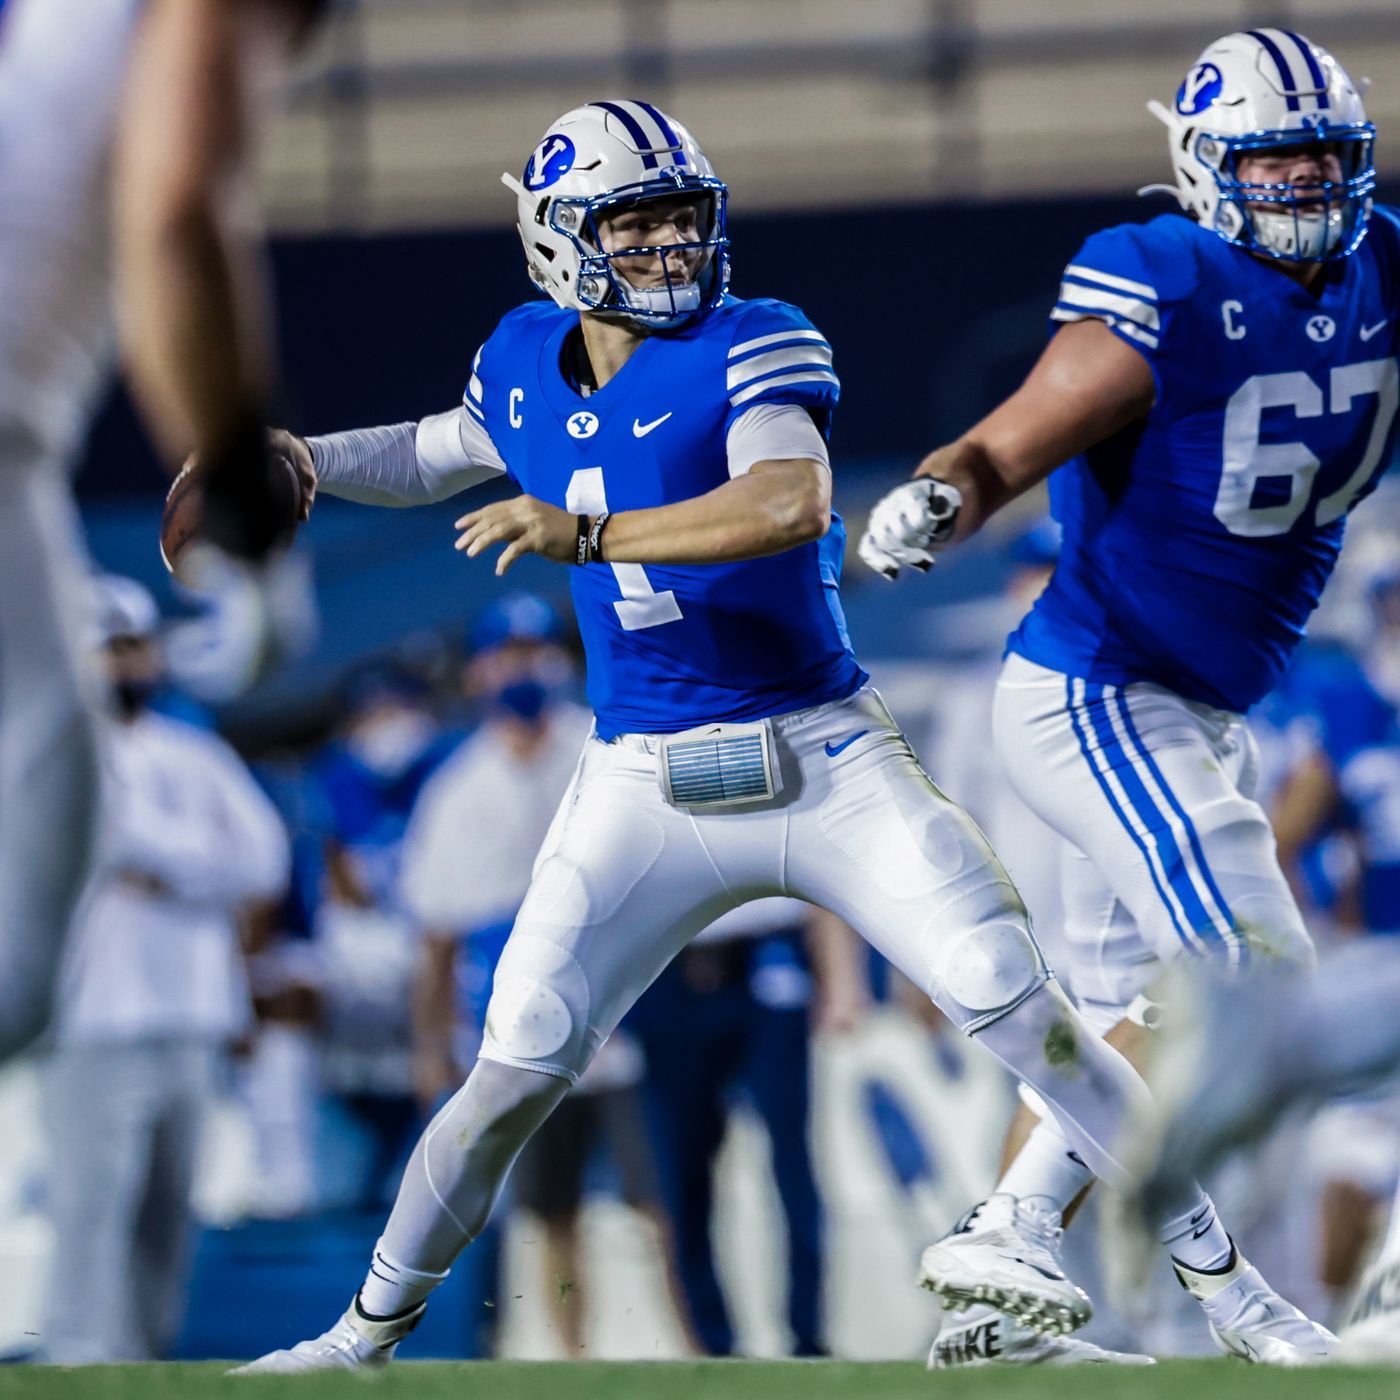 BYU Quarterback Zach Wilson Is Silencing His Doubters With Near Flawless Play